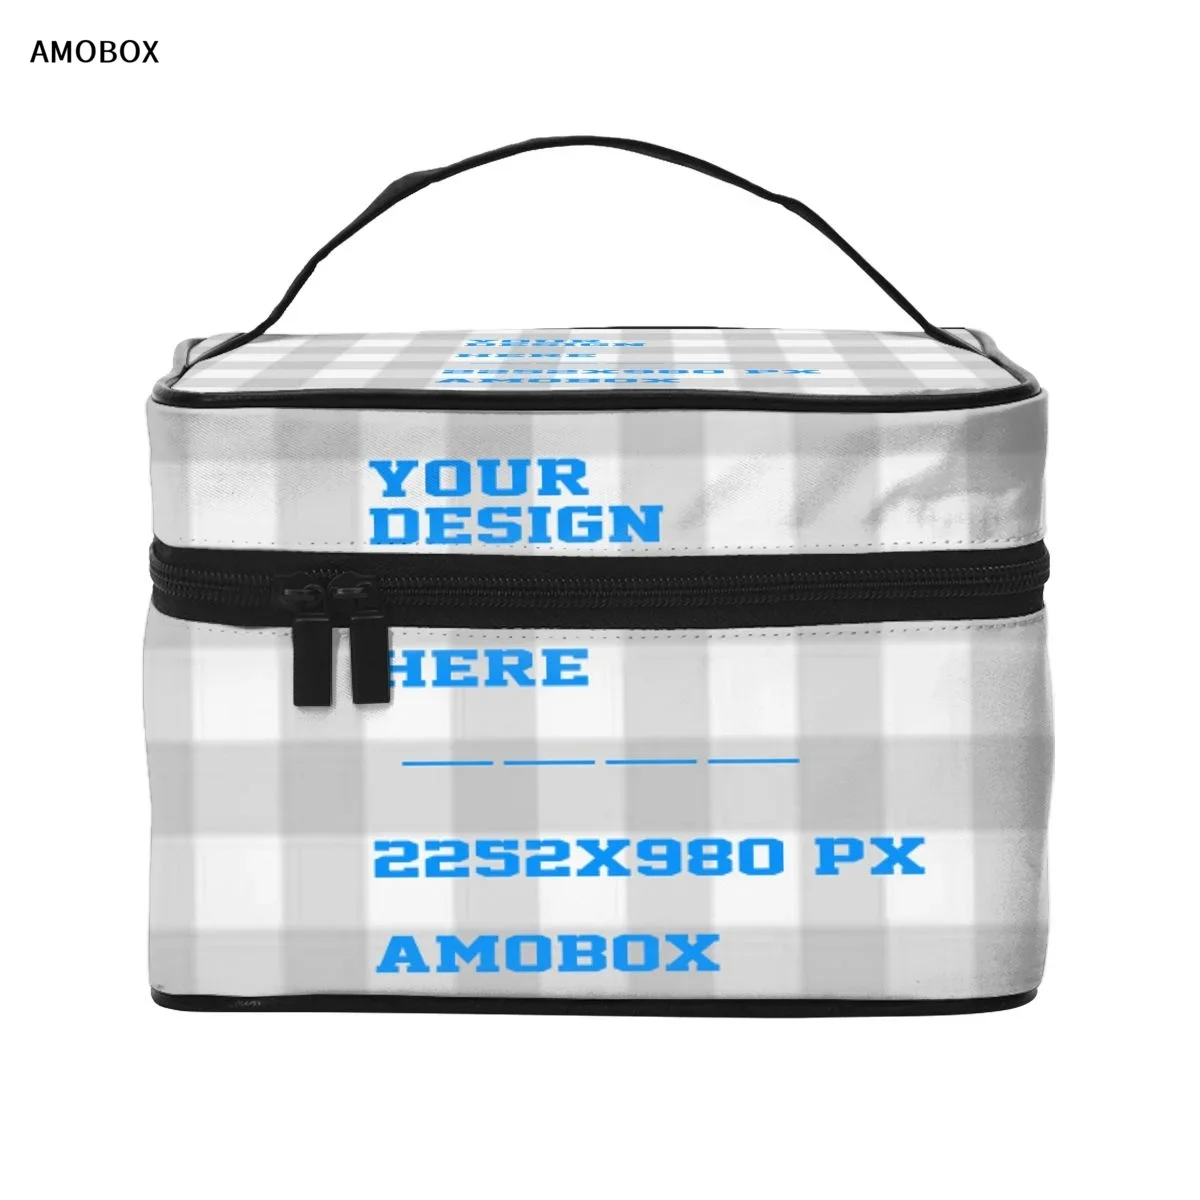 

AMOBOX Customizable Personalized Makeup Cosmetic Bag with Zipper, Open Flat Makeup Pouch, Microfiber Leather Mesh Bag